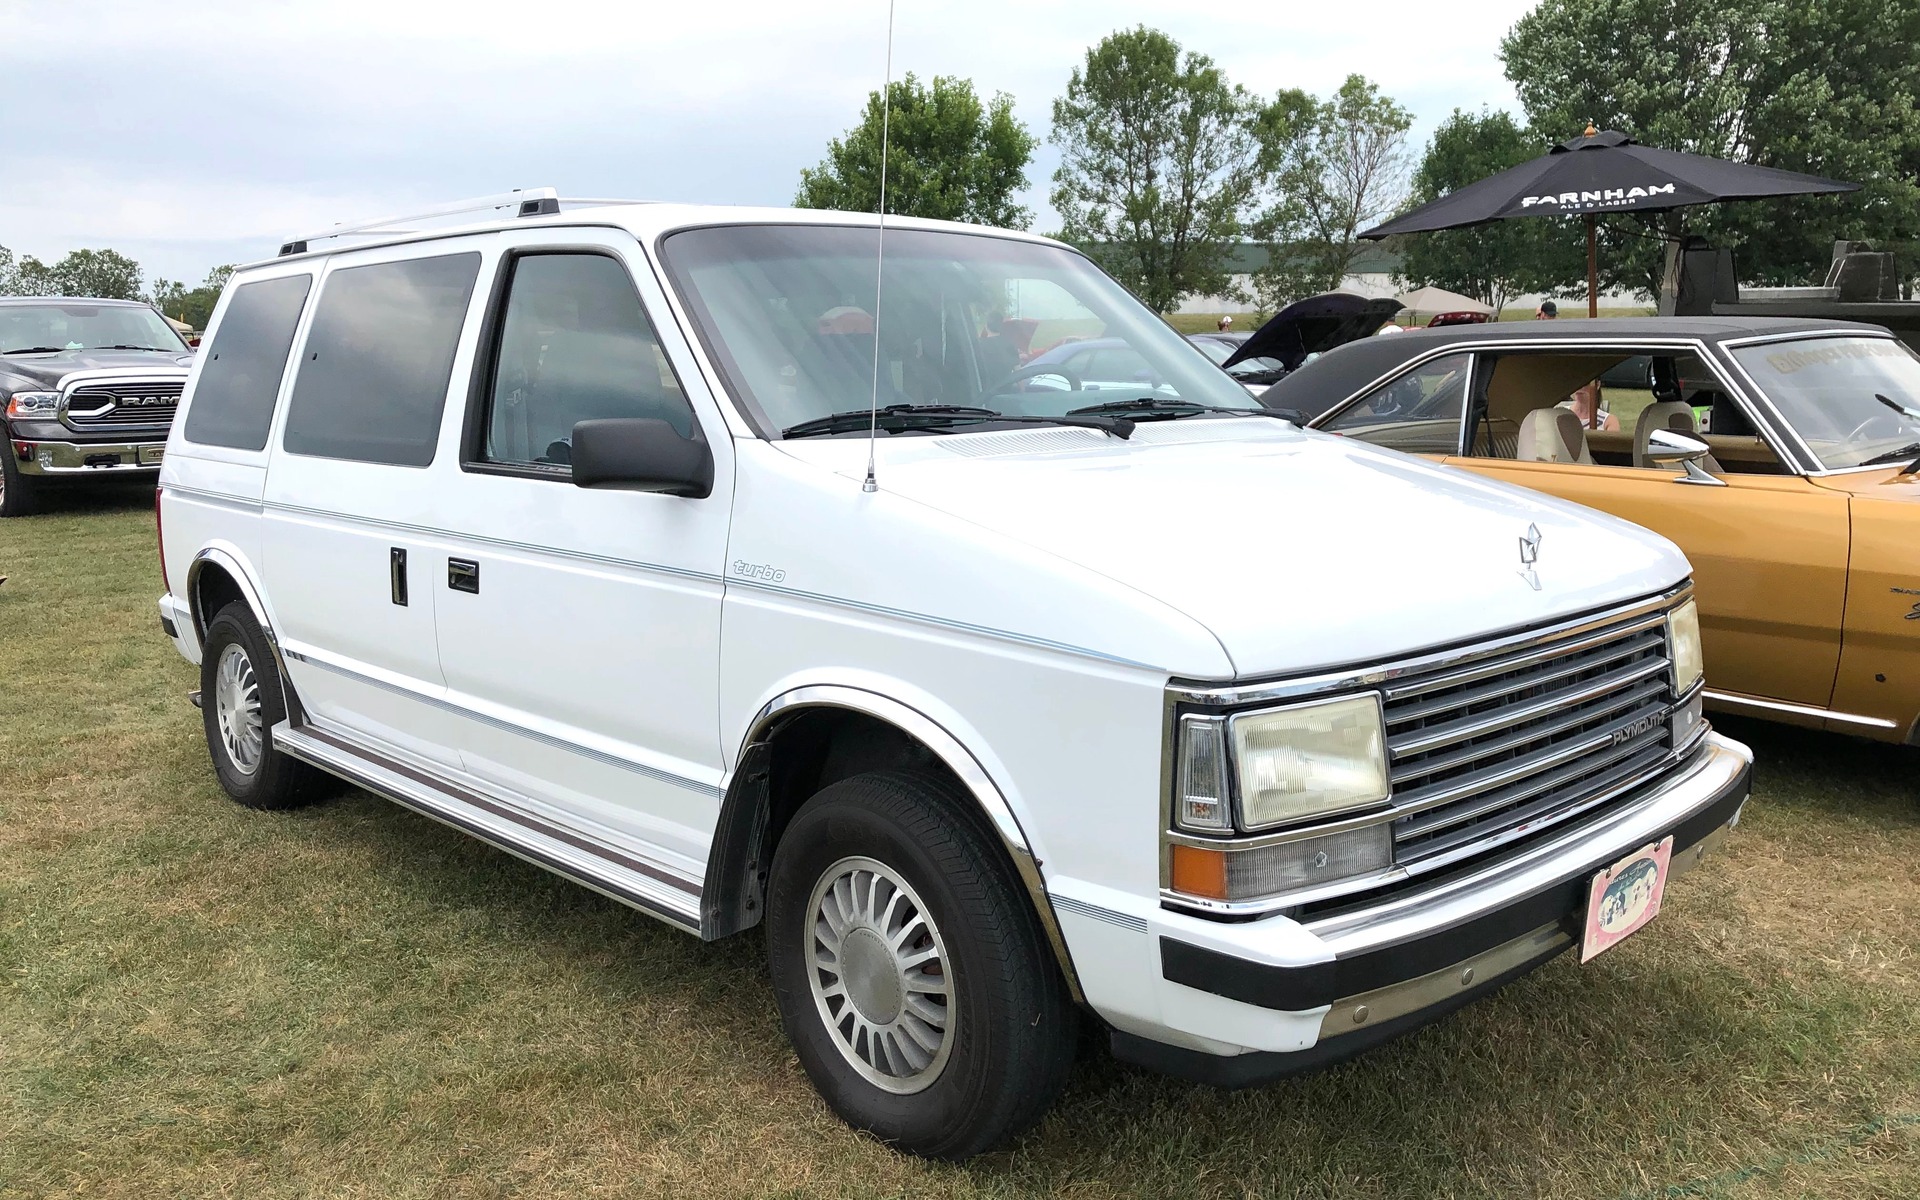 <p>Plymouth Voyager 1989 </p>
